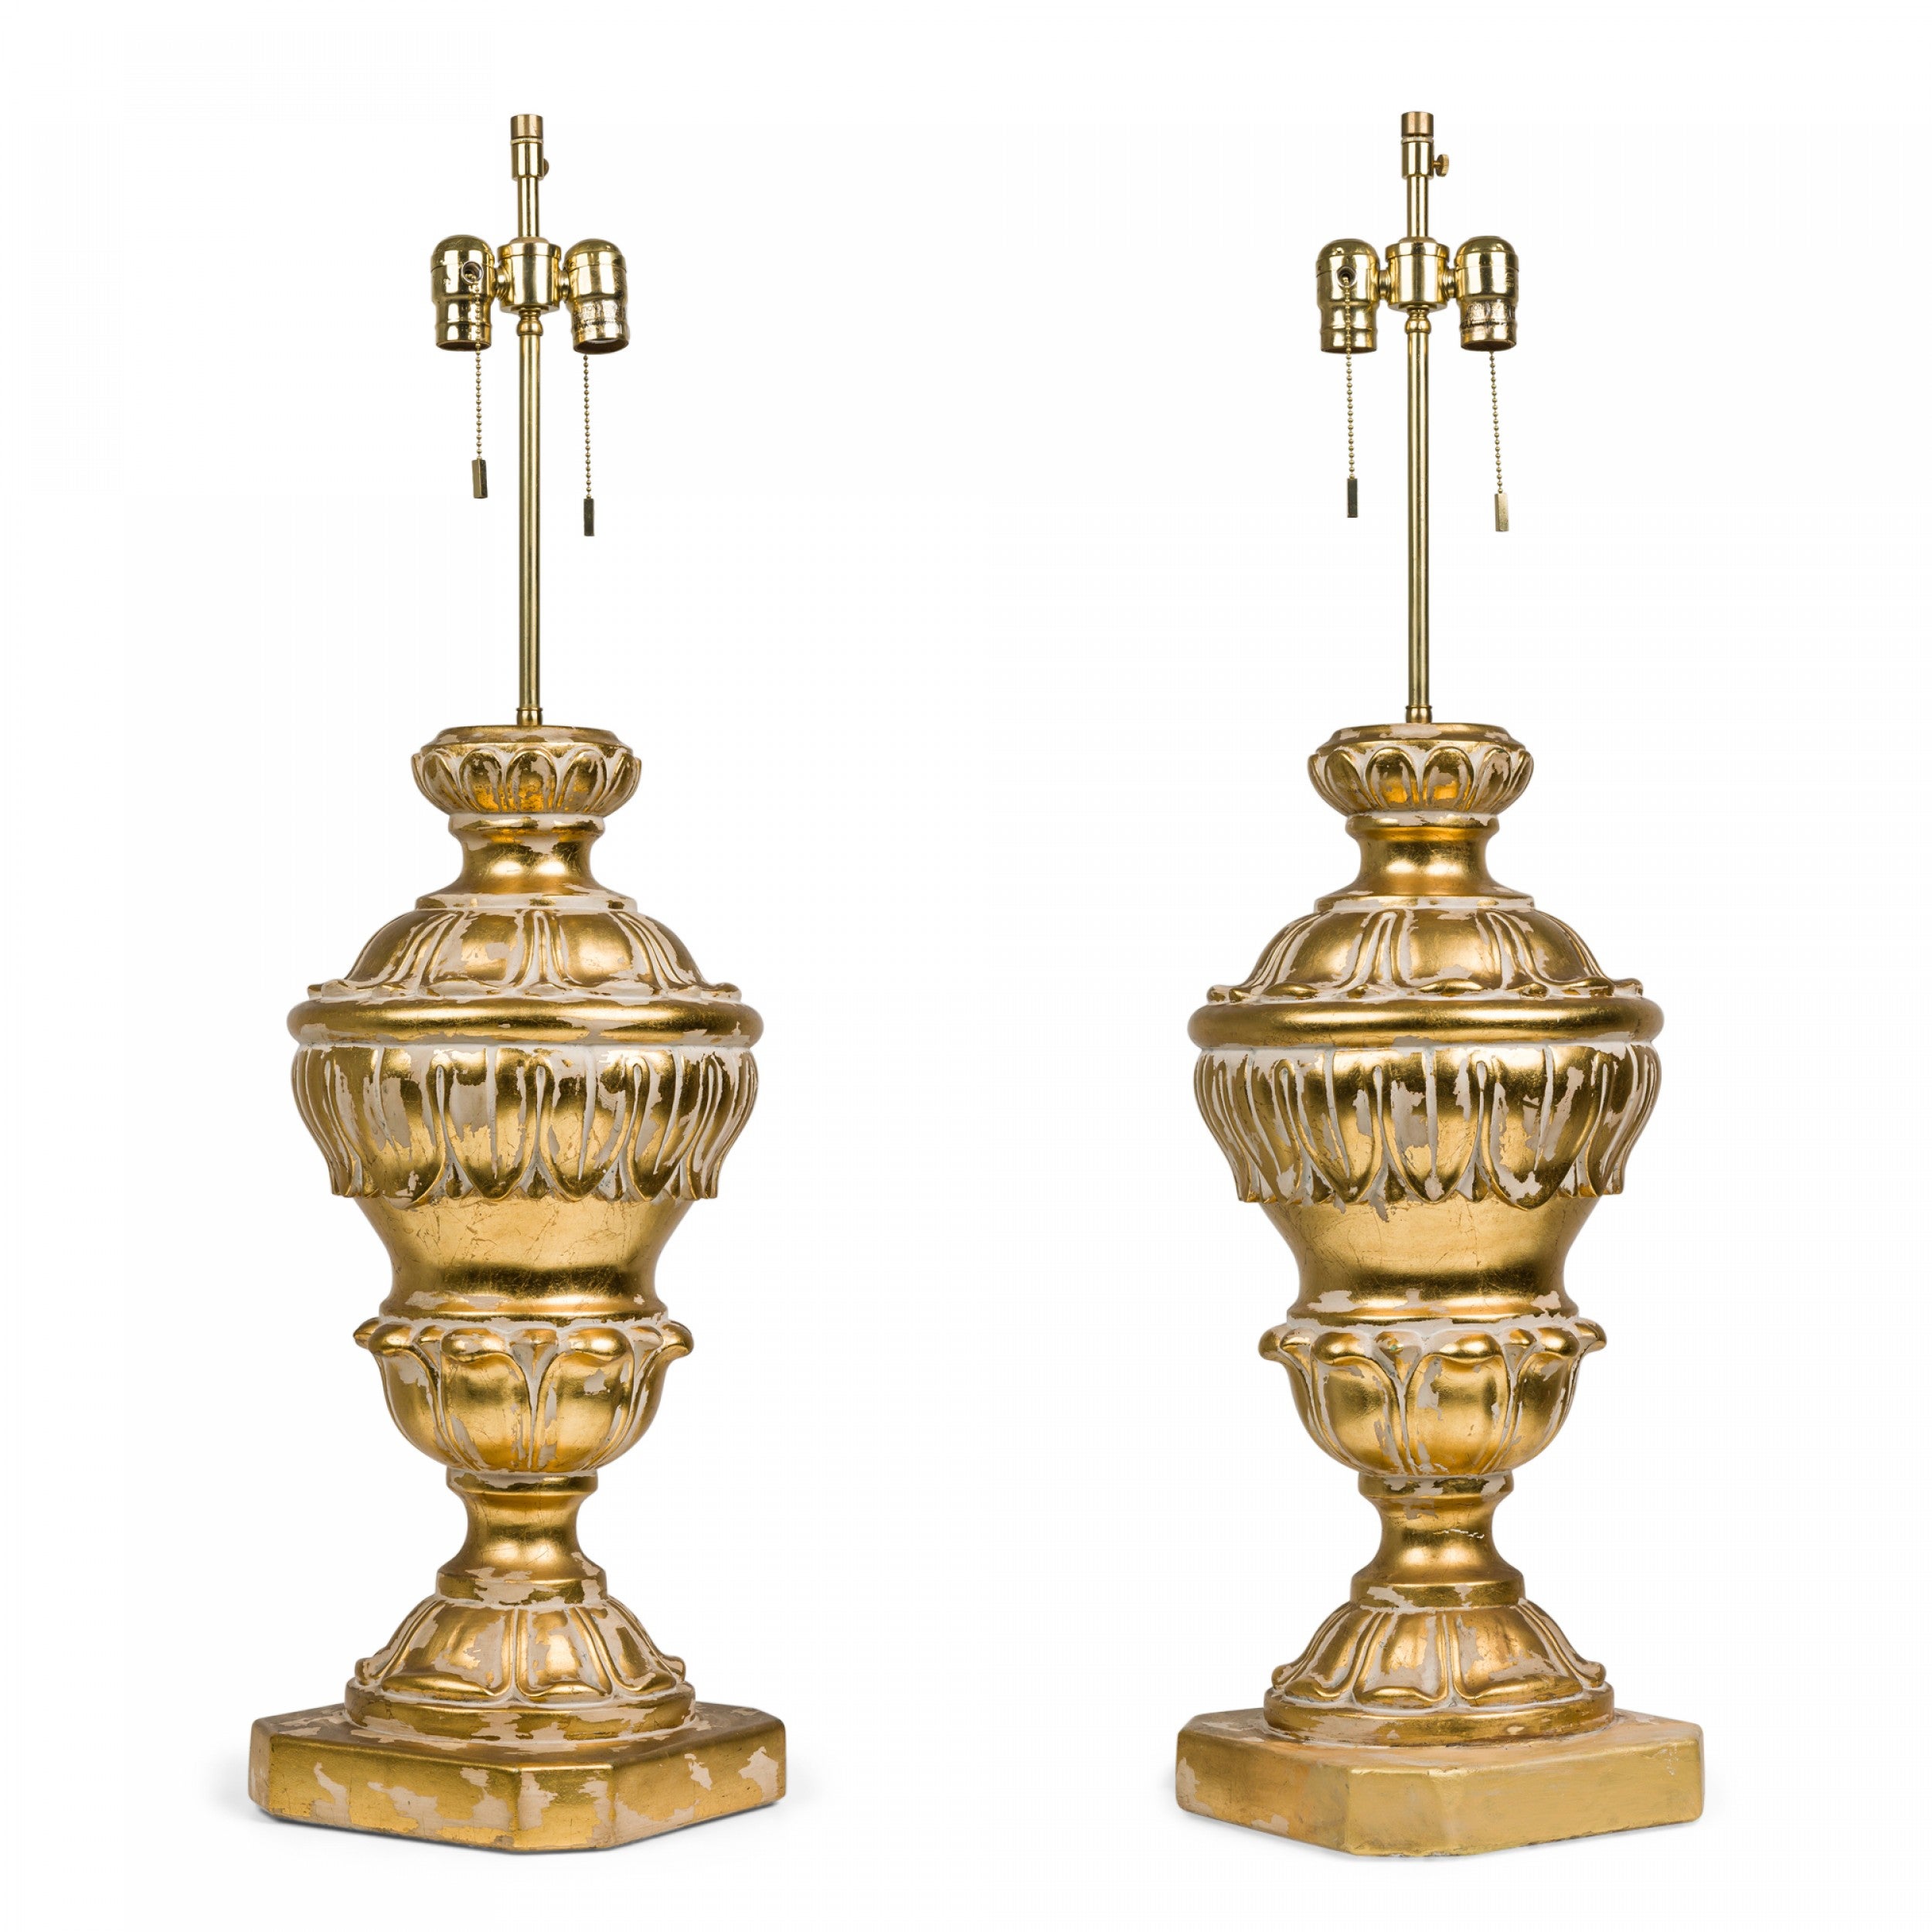 Pair of Frederick Cooper American Plaster Parcel Gilt Baluster Table Lamps